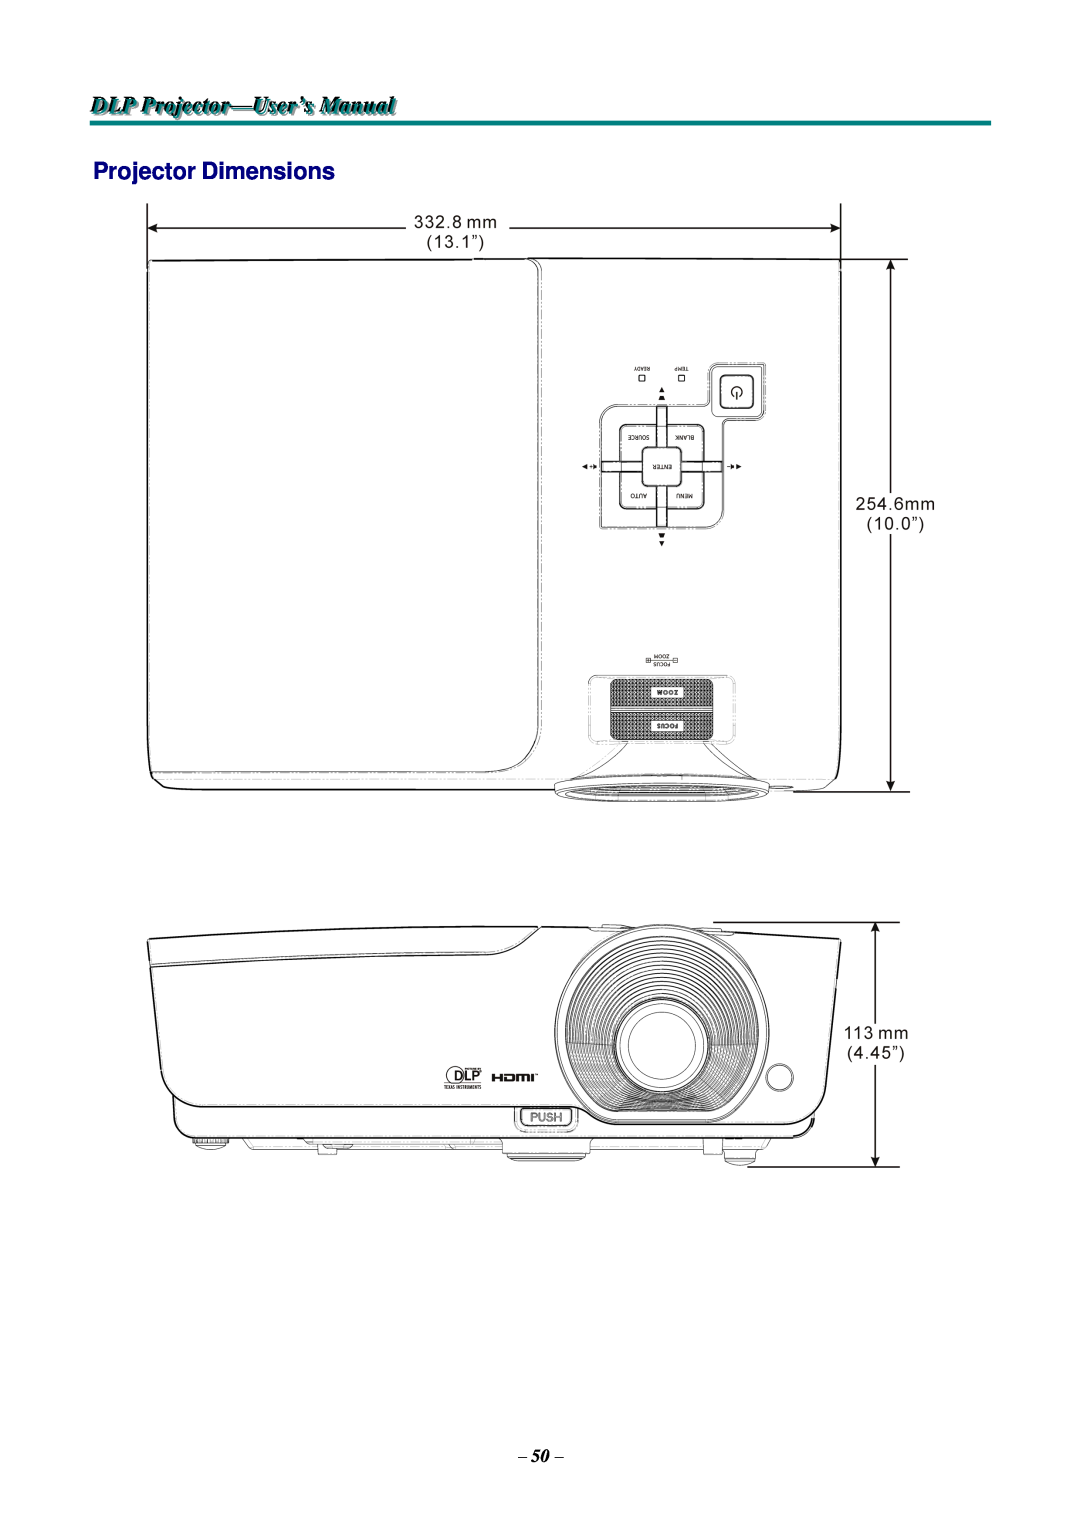 Knoll Systems HDO2200 user manual Projector Dimensions, DLP Projjjectttor-User’s Manualll 